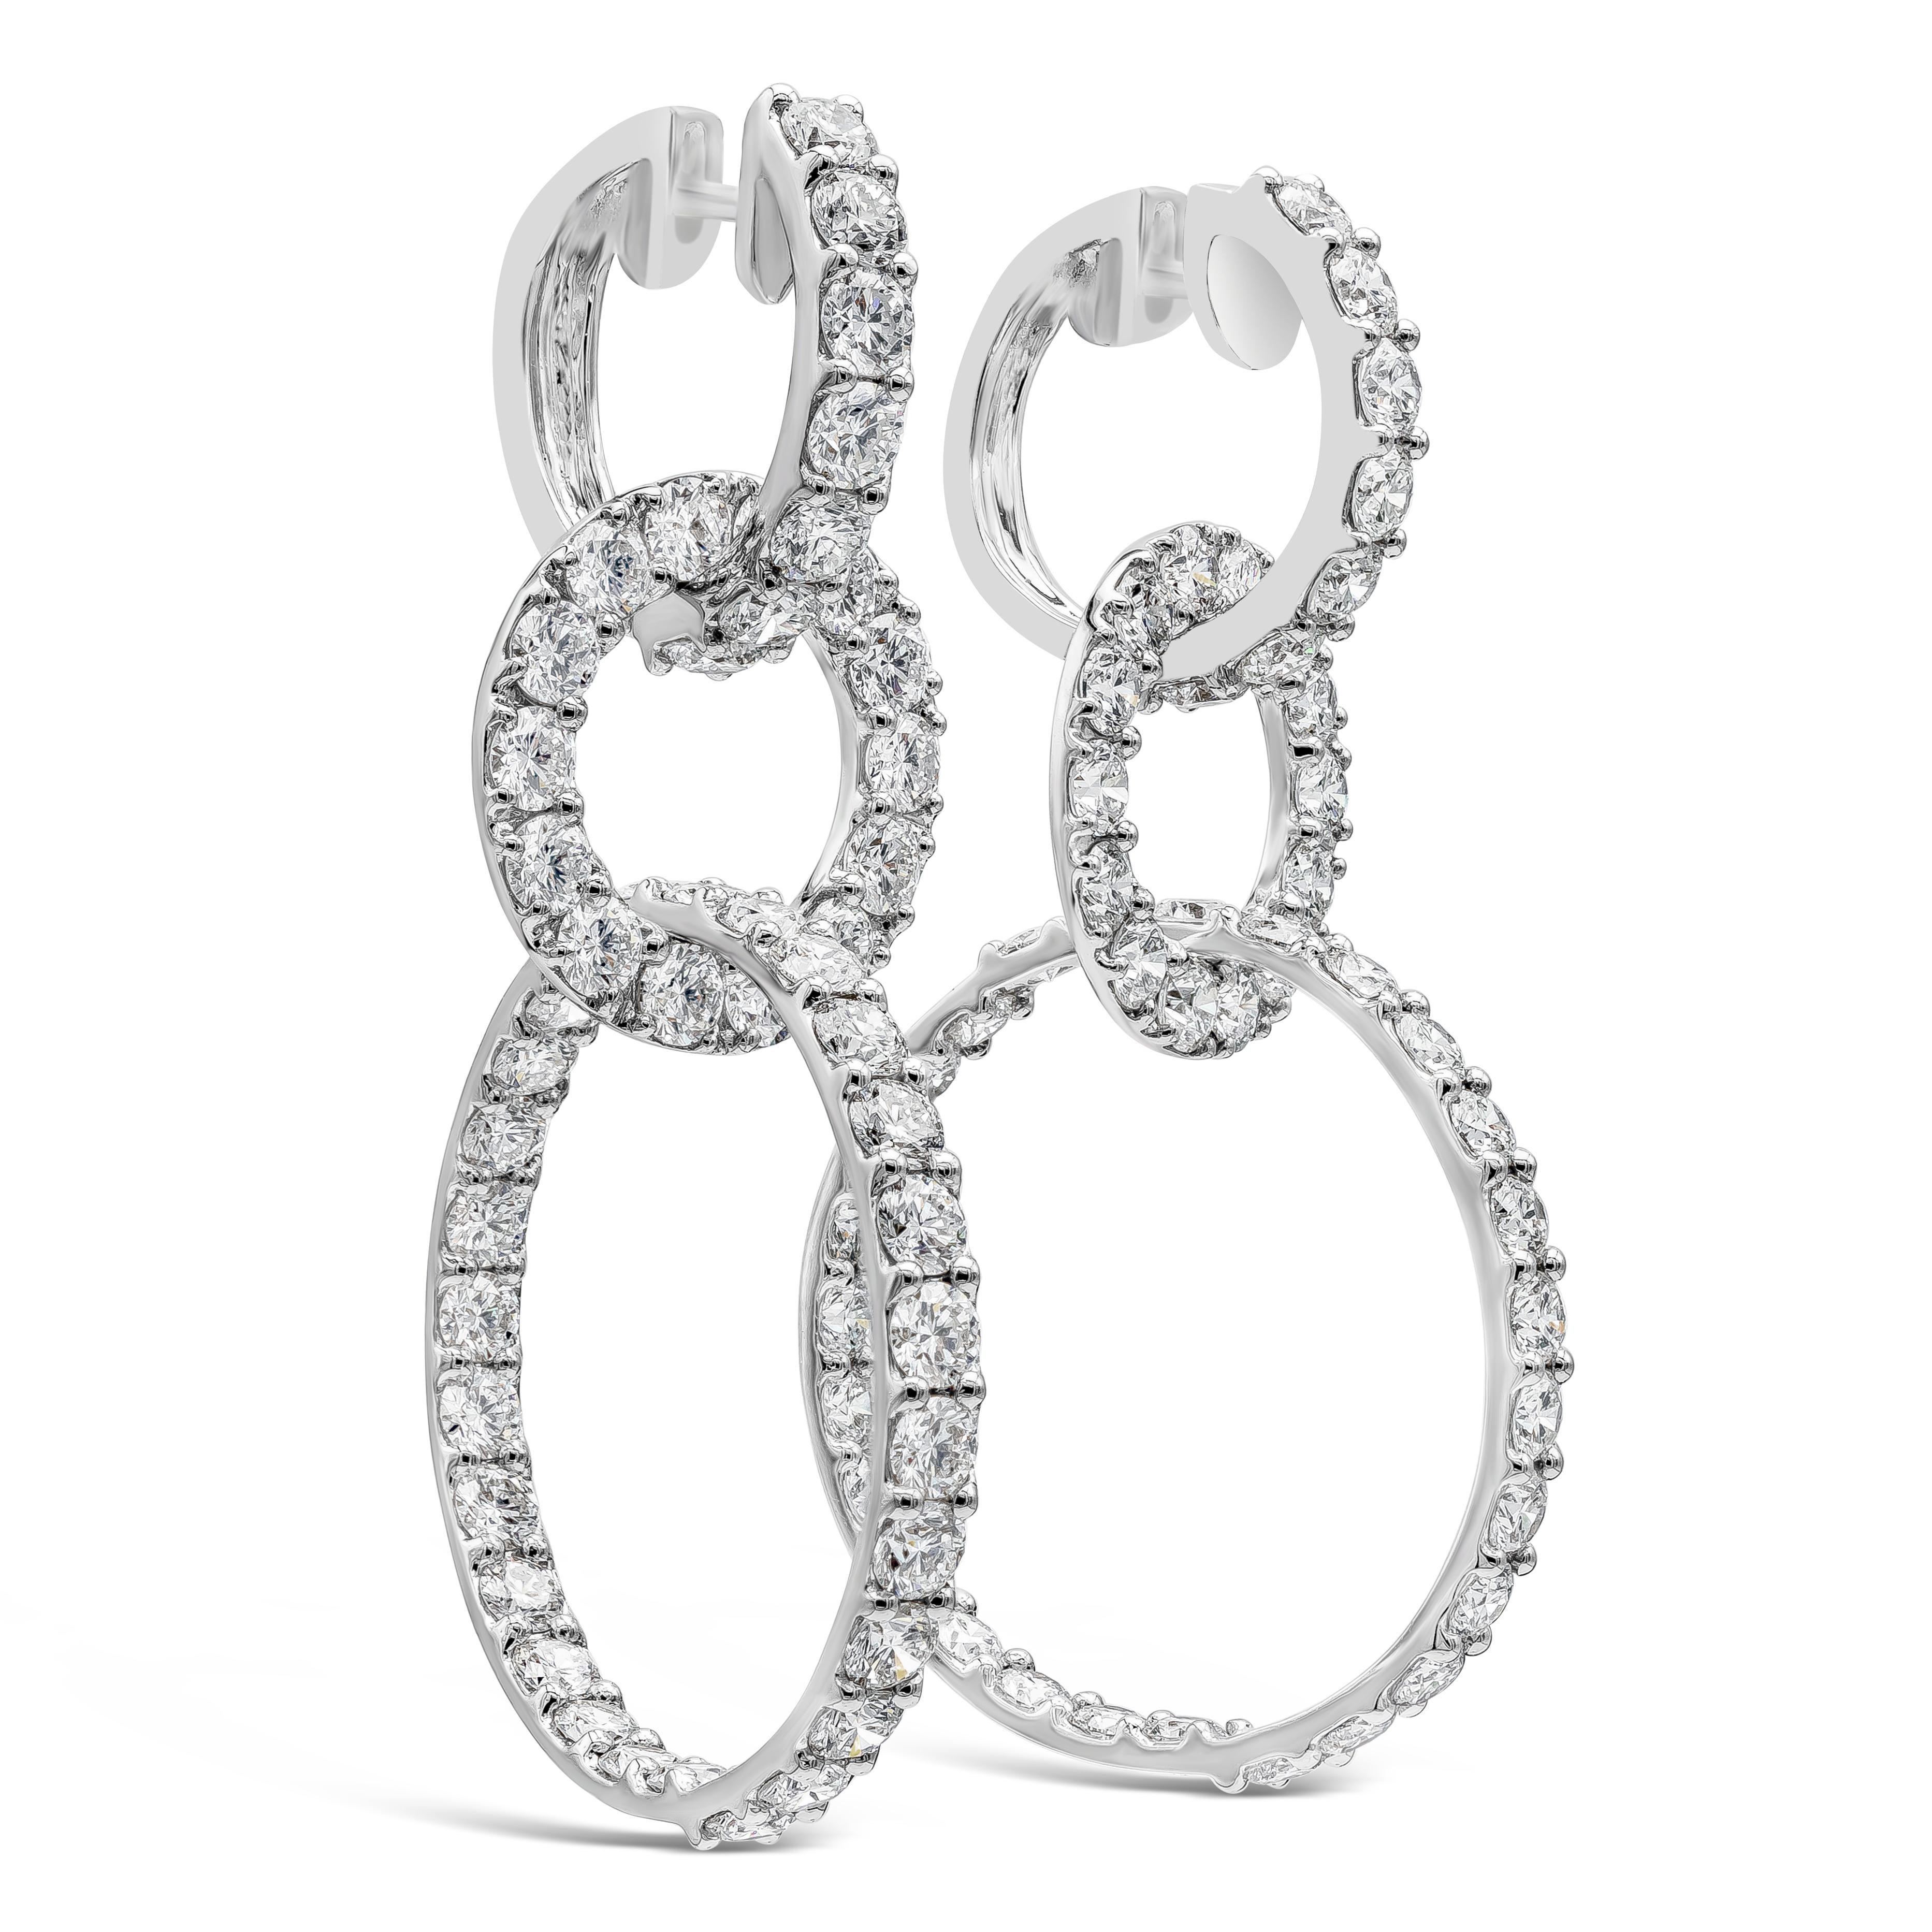 A chic fashion drop earring made up of 96 brilliant round diamond in a triple ring design. Diamonds weigh 12.15 carats total, F-G Color and VS-SI in Clarity. Made with 18K White Gold 2.20 inches in Length.

Roman Malakov is a custom house,